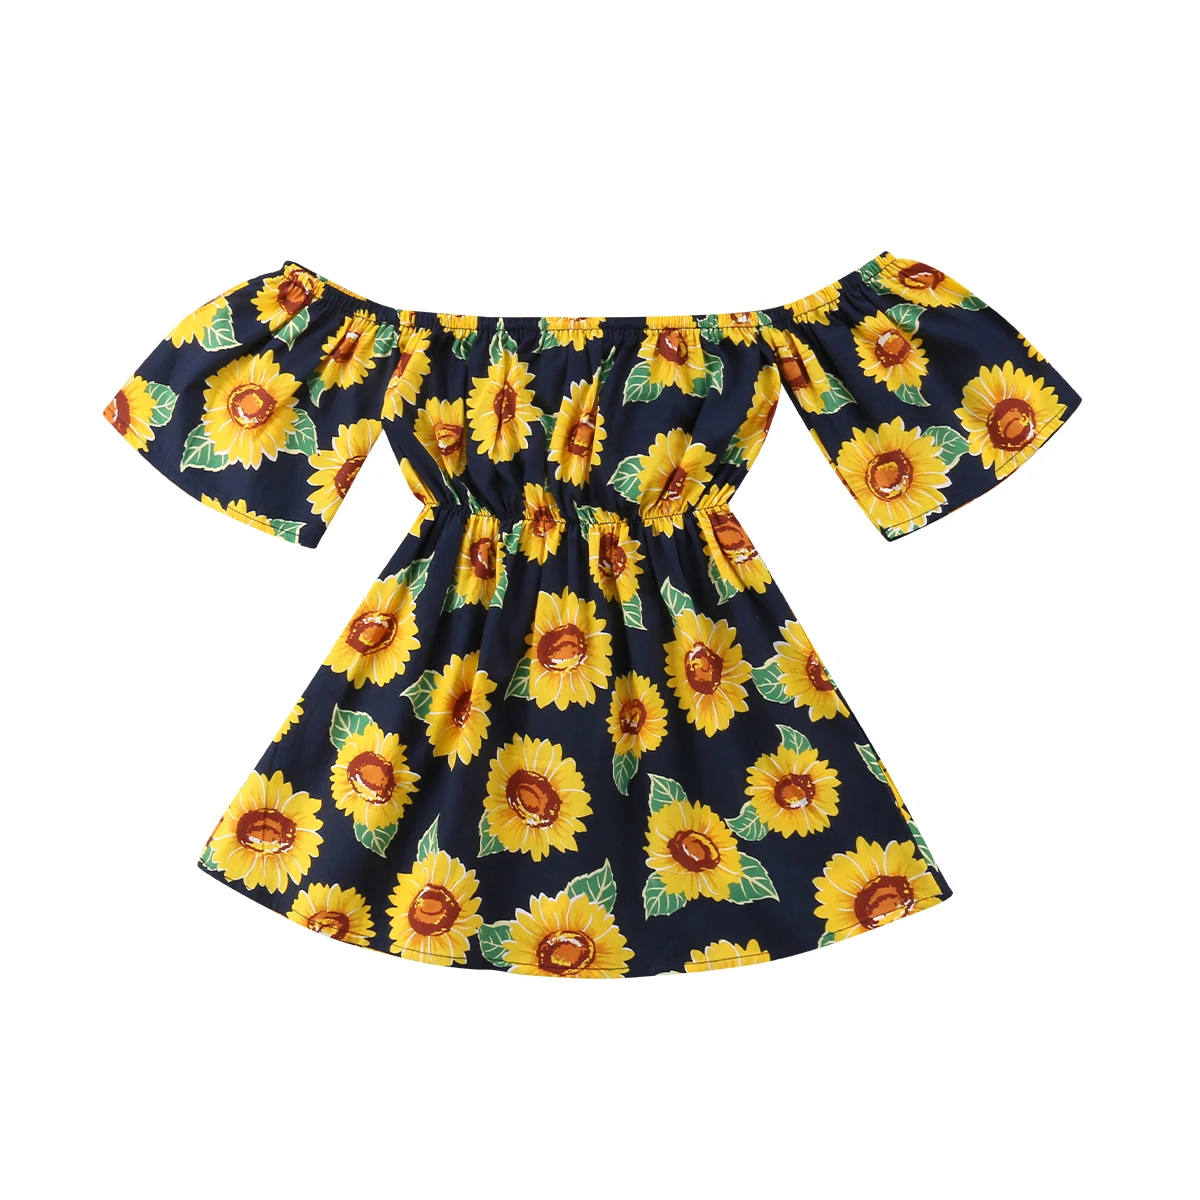 

Kids Baby Clothing Sunflower Dress Off Shoulder Party Pageant Tutu Maxi Dress Summer Floral Cute Sundress Clothes Girls 1-6T